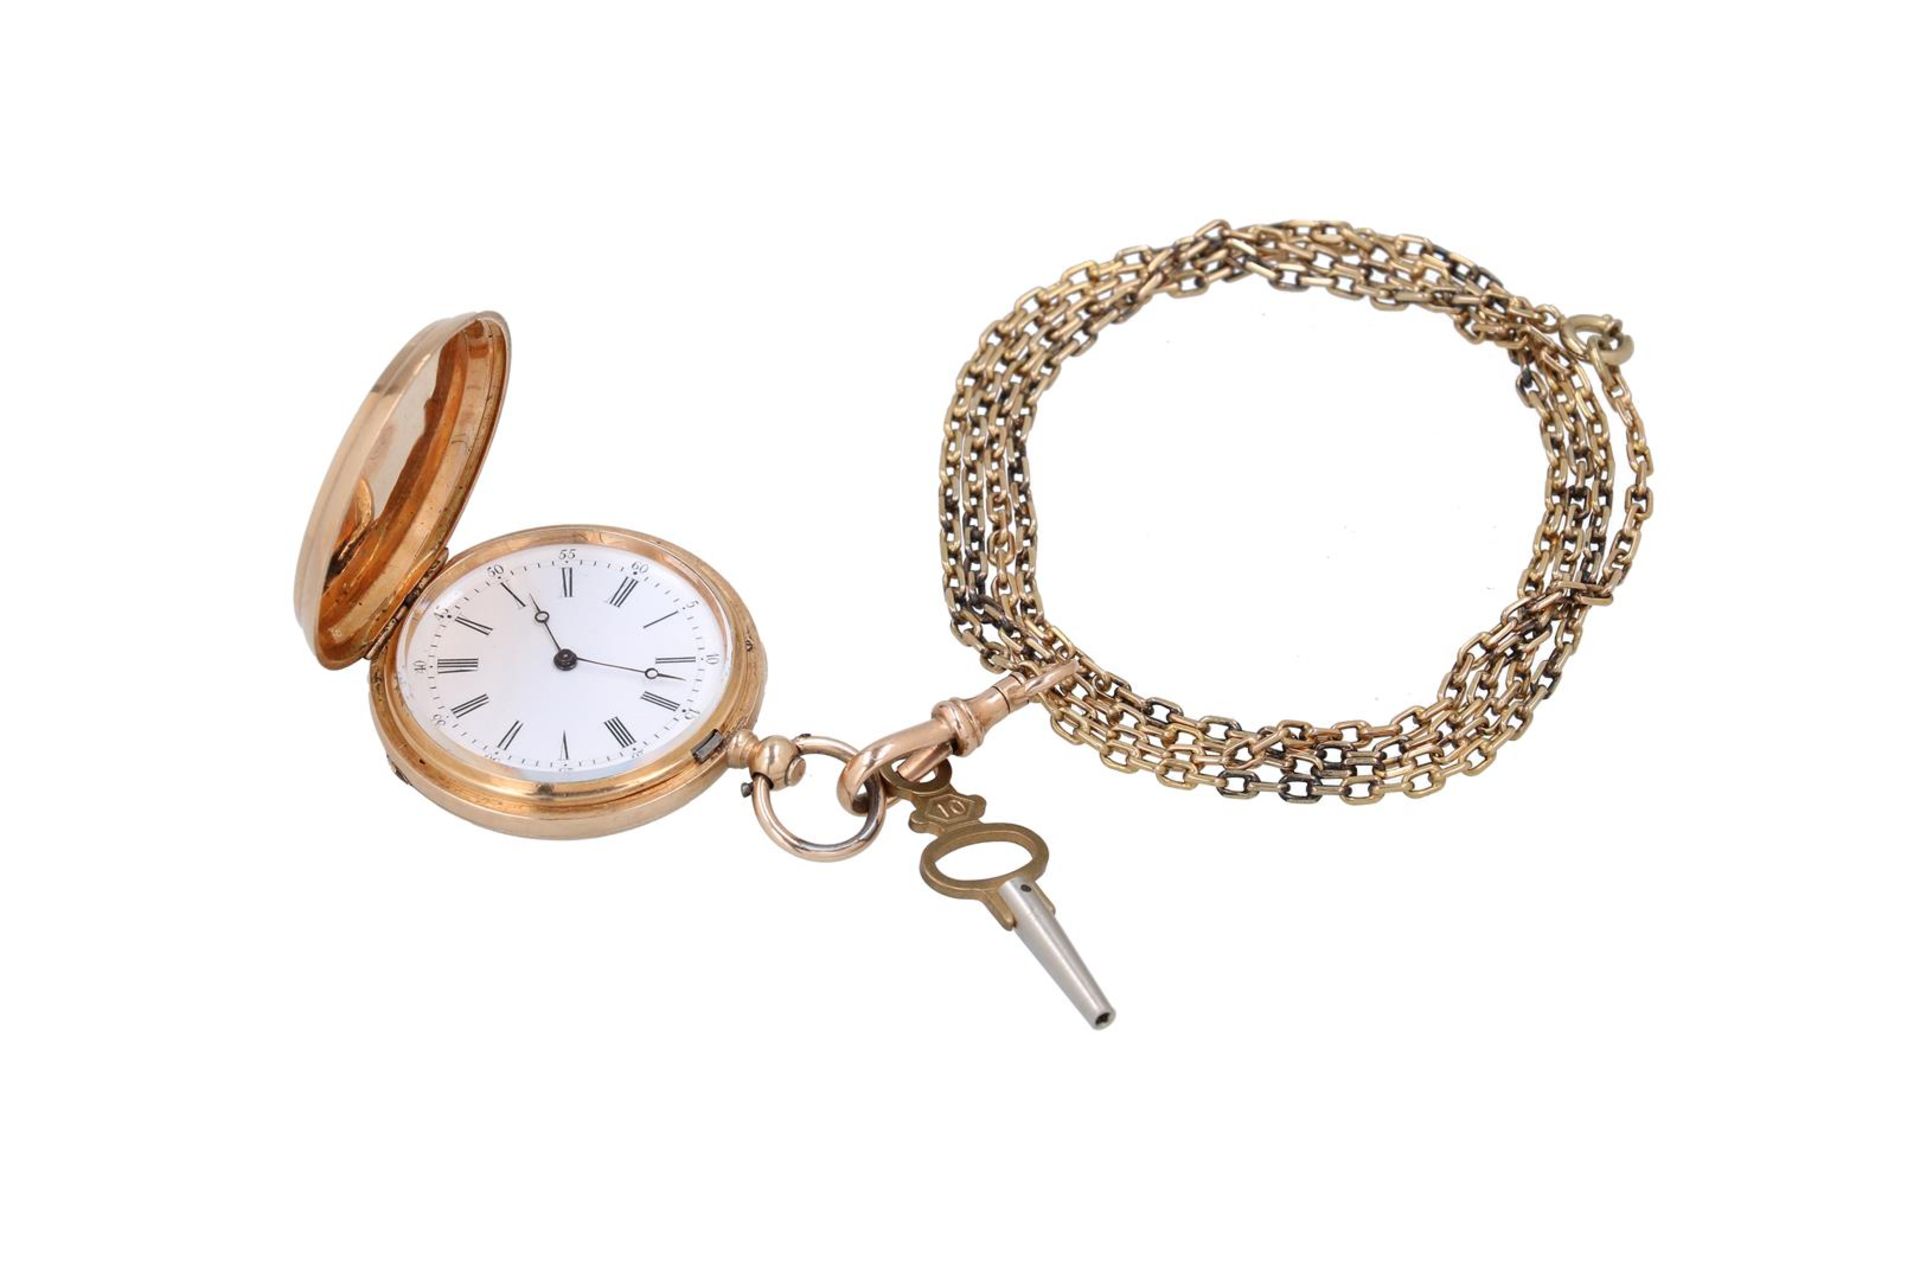 A 14-kt gold ladies remontoir pocket watch on a gold chain, Peret et fils, the engraved case with mo